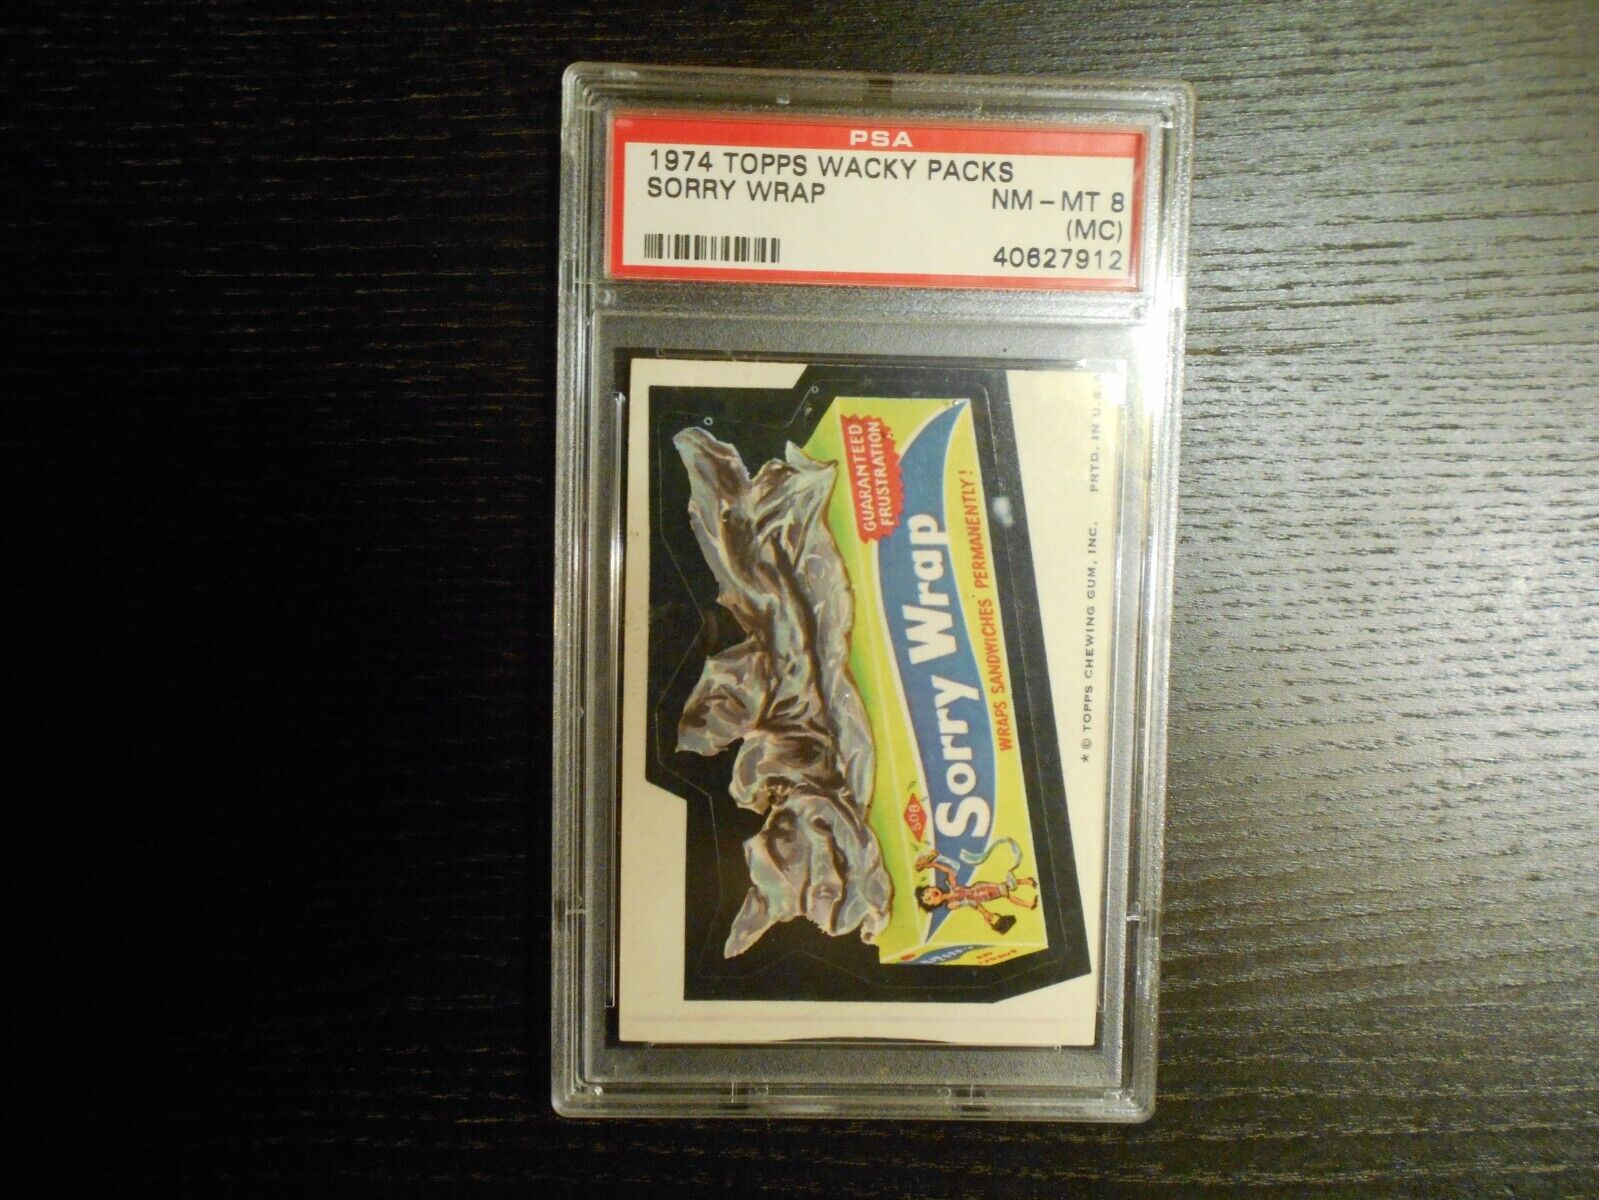 1974 Topps WACKY PACKAGES Series 7 Sorry Wrap PSA 8 m/c (NM-MINT) 💎